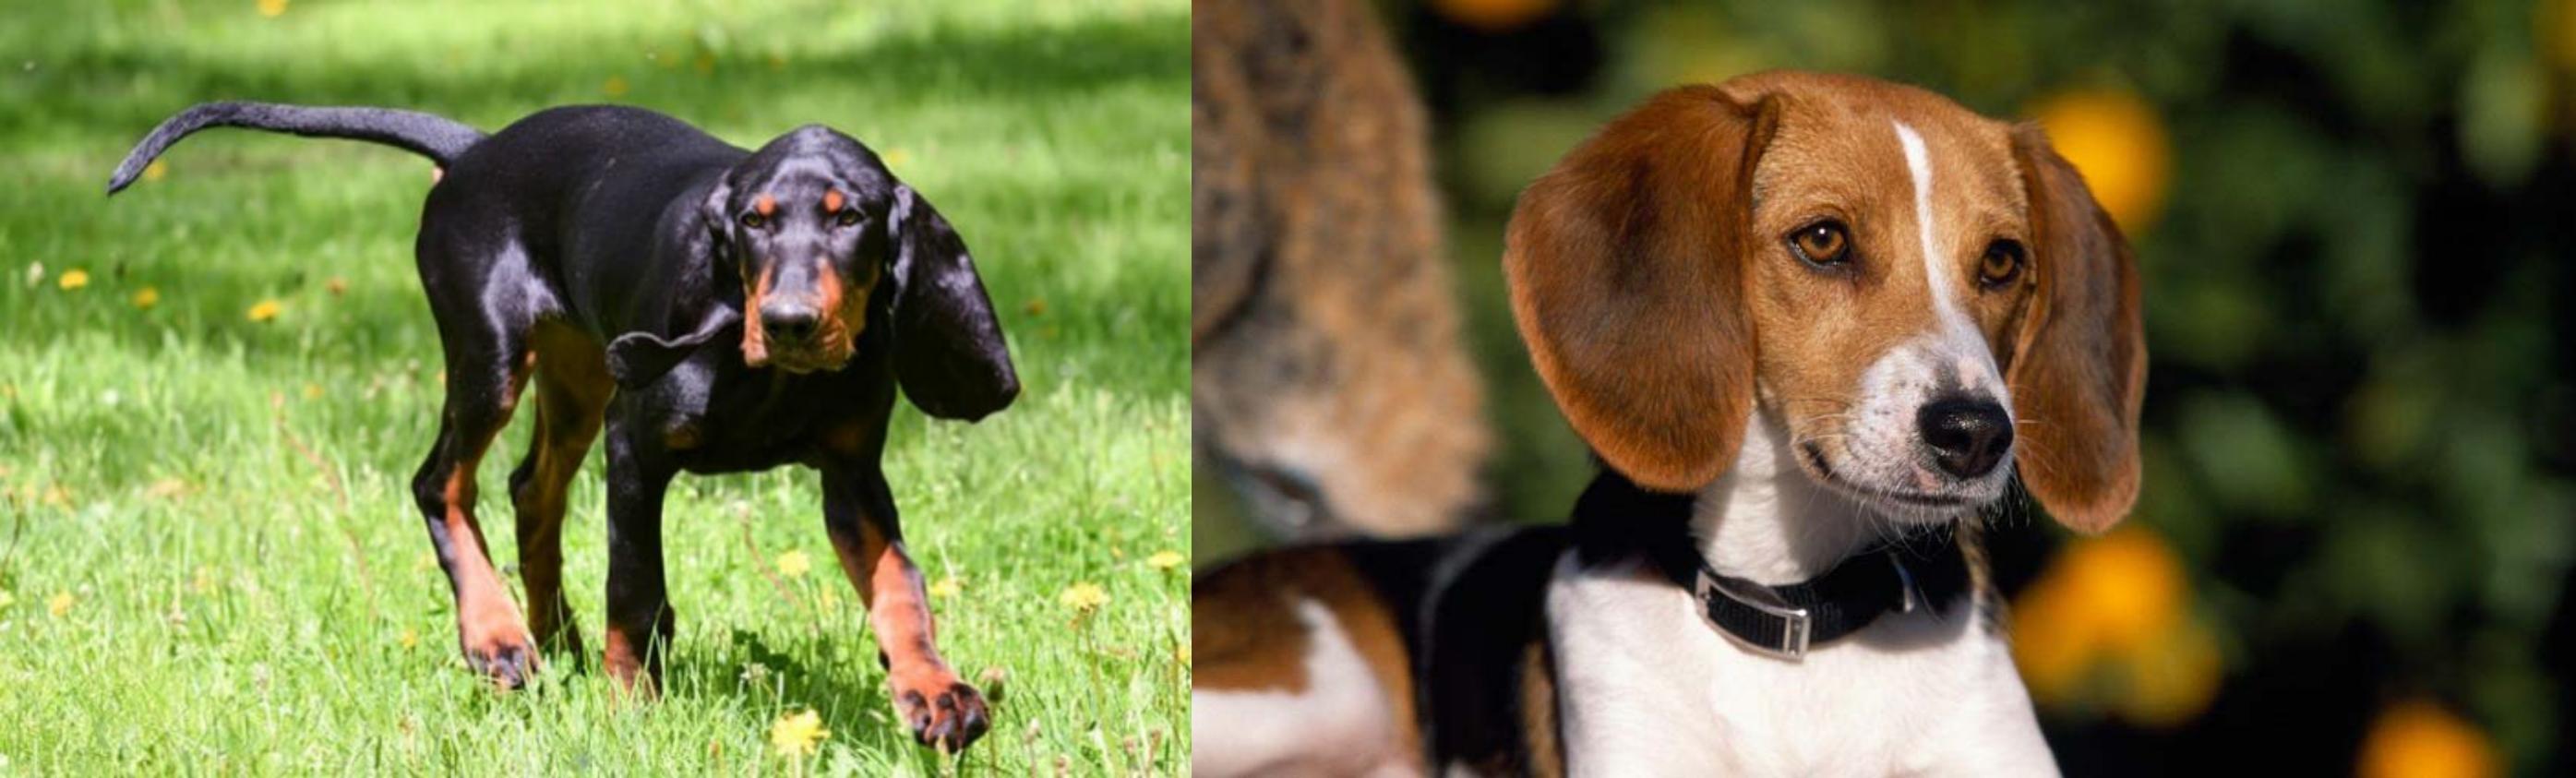 Black And Tan Coonhound Vs American Foxhound Breed Comparison